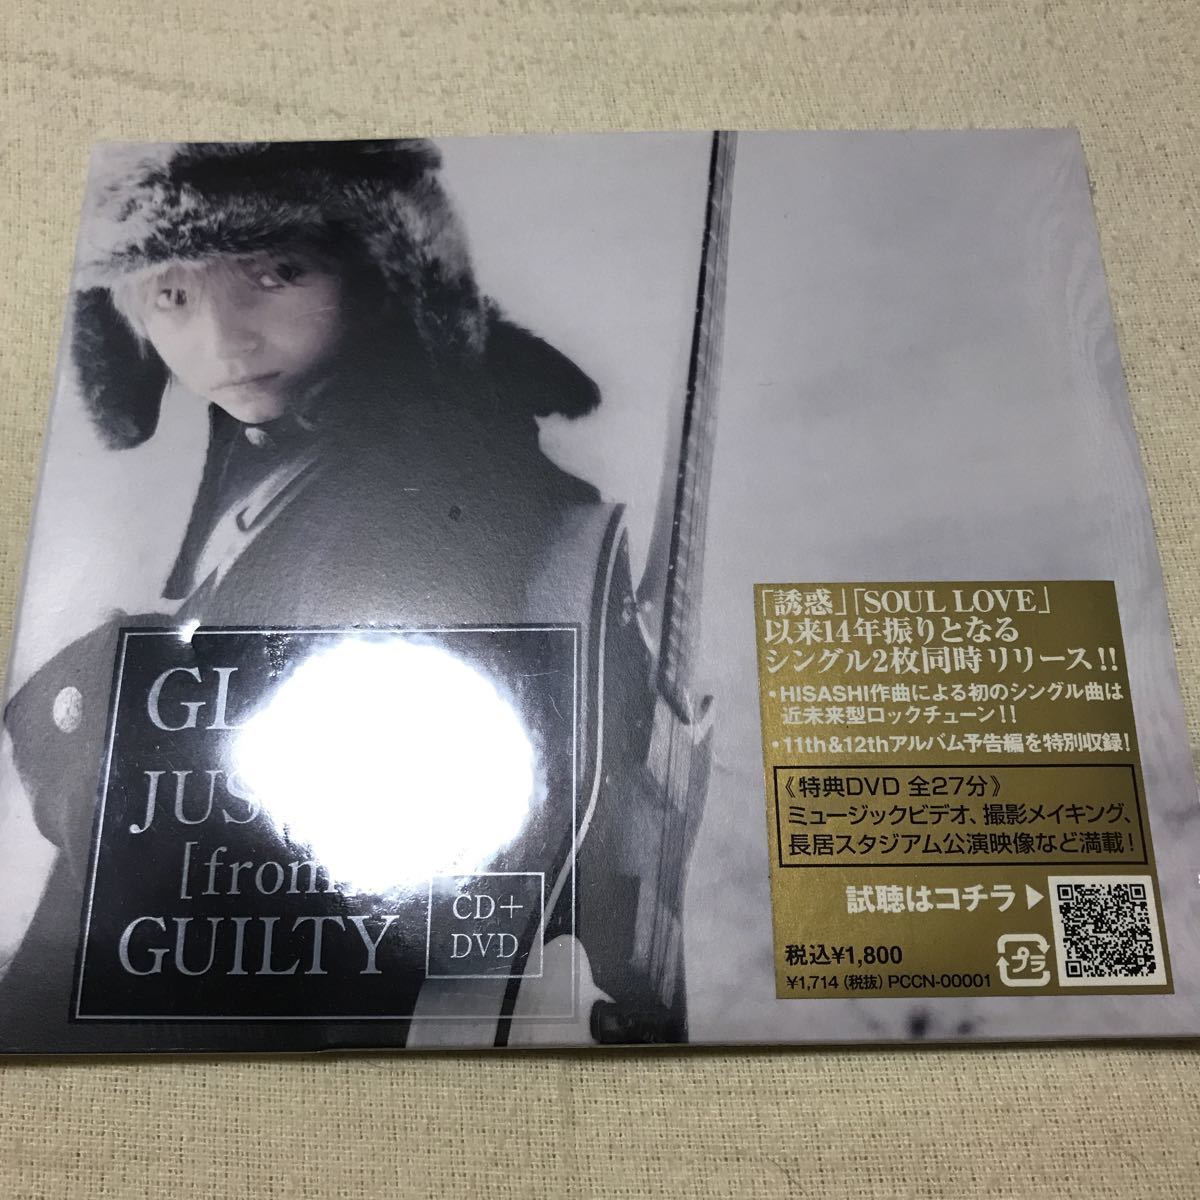 JUSTICE [from] GUILTY／GLAY